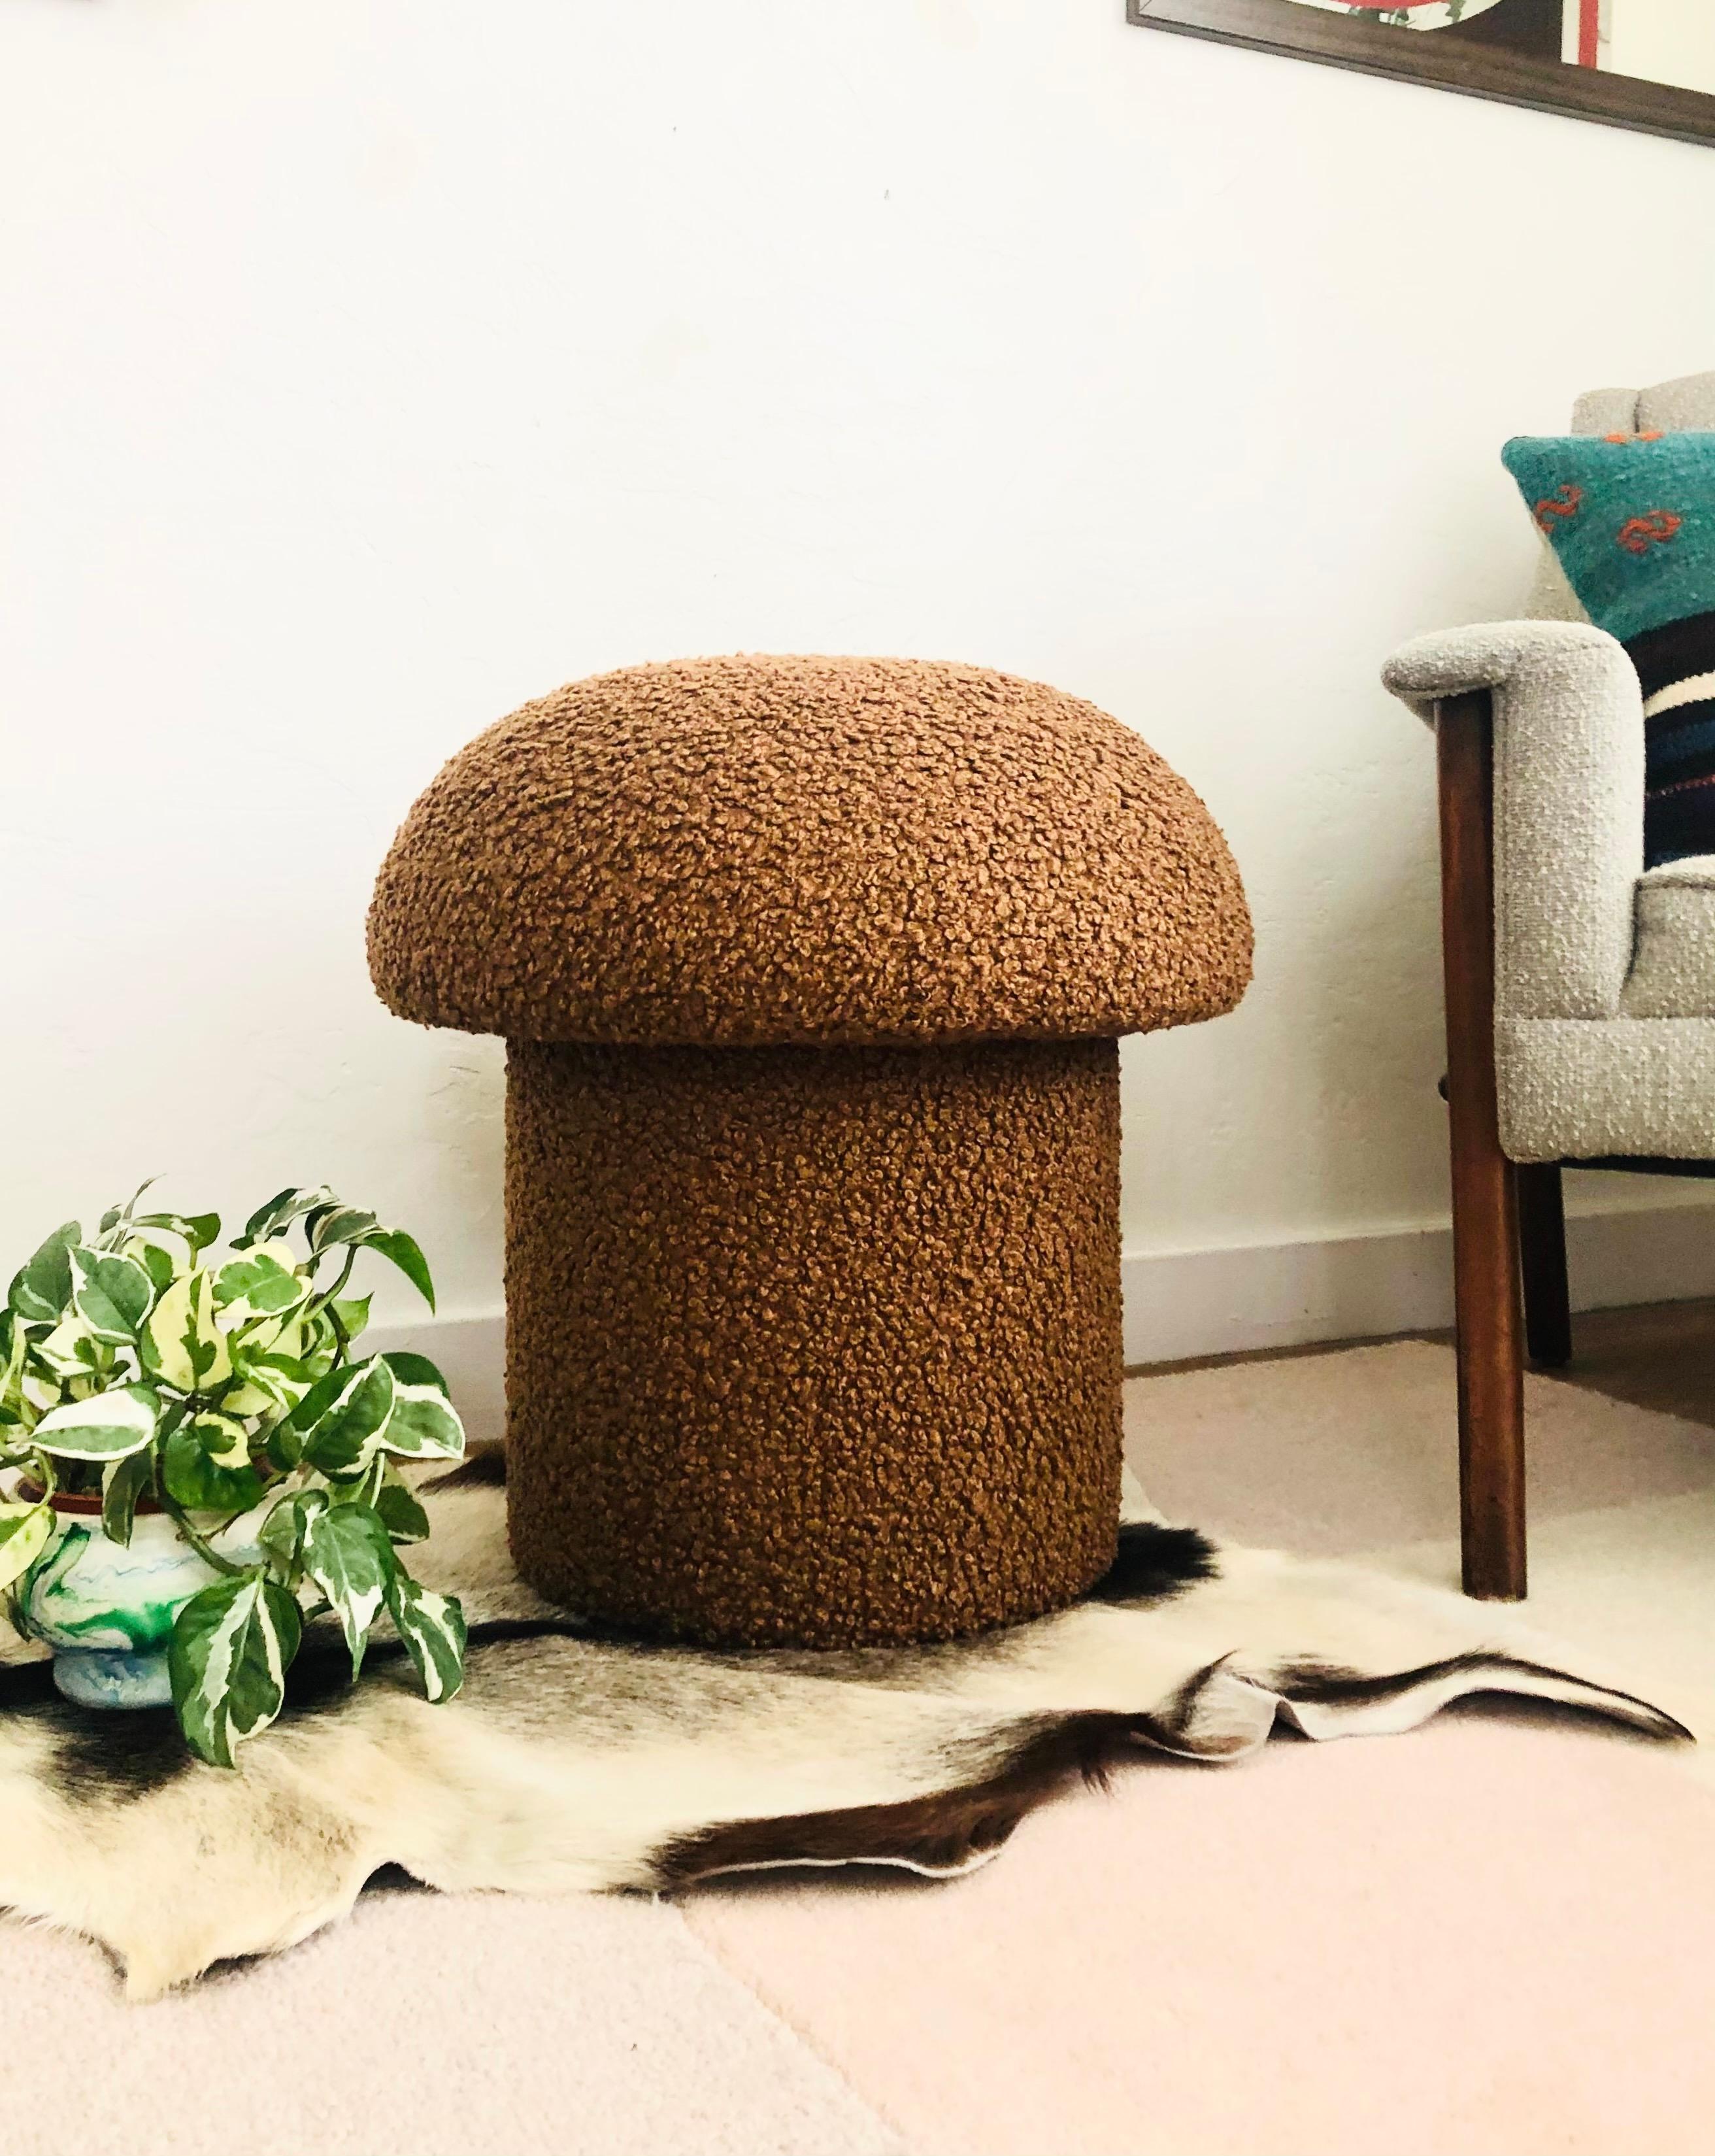 A handmade mushroom shaped ottoman, upholstered in a chestnut brown colored curly boucle fabric. Perfect for using as a footstool or extra occasional seating. A comfortable cushioned seat and sculptural accent piece.
Mushroom ottomans are made to